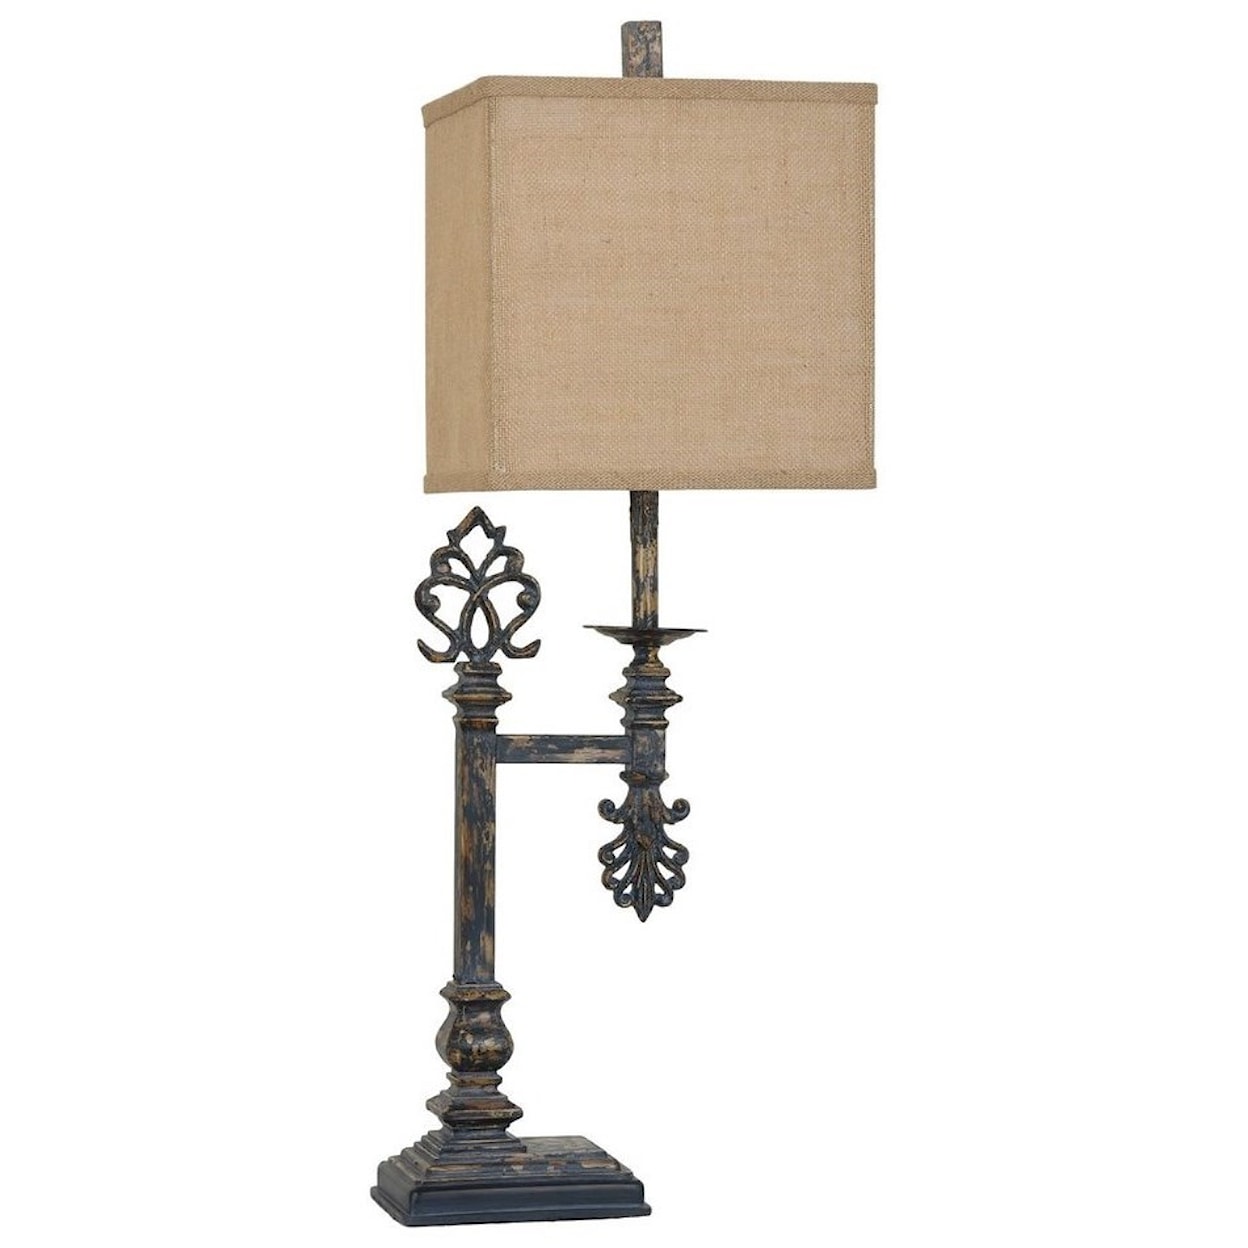 Crestview Collection Lighting Castle Gate Table Lamp